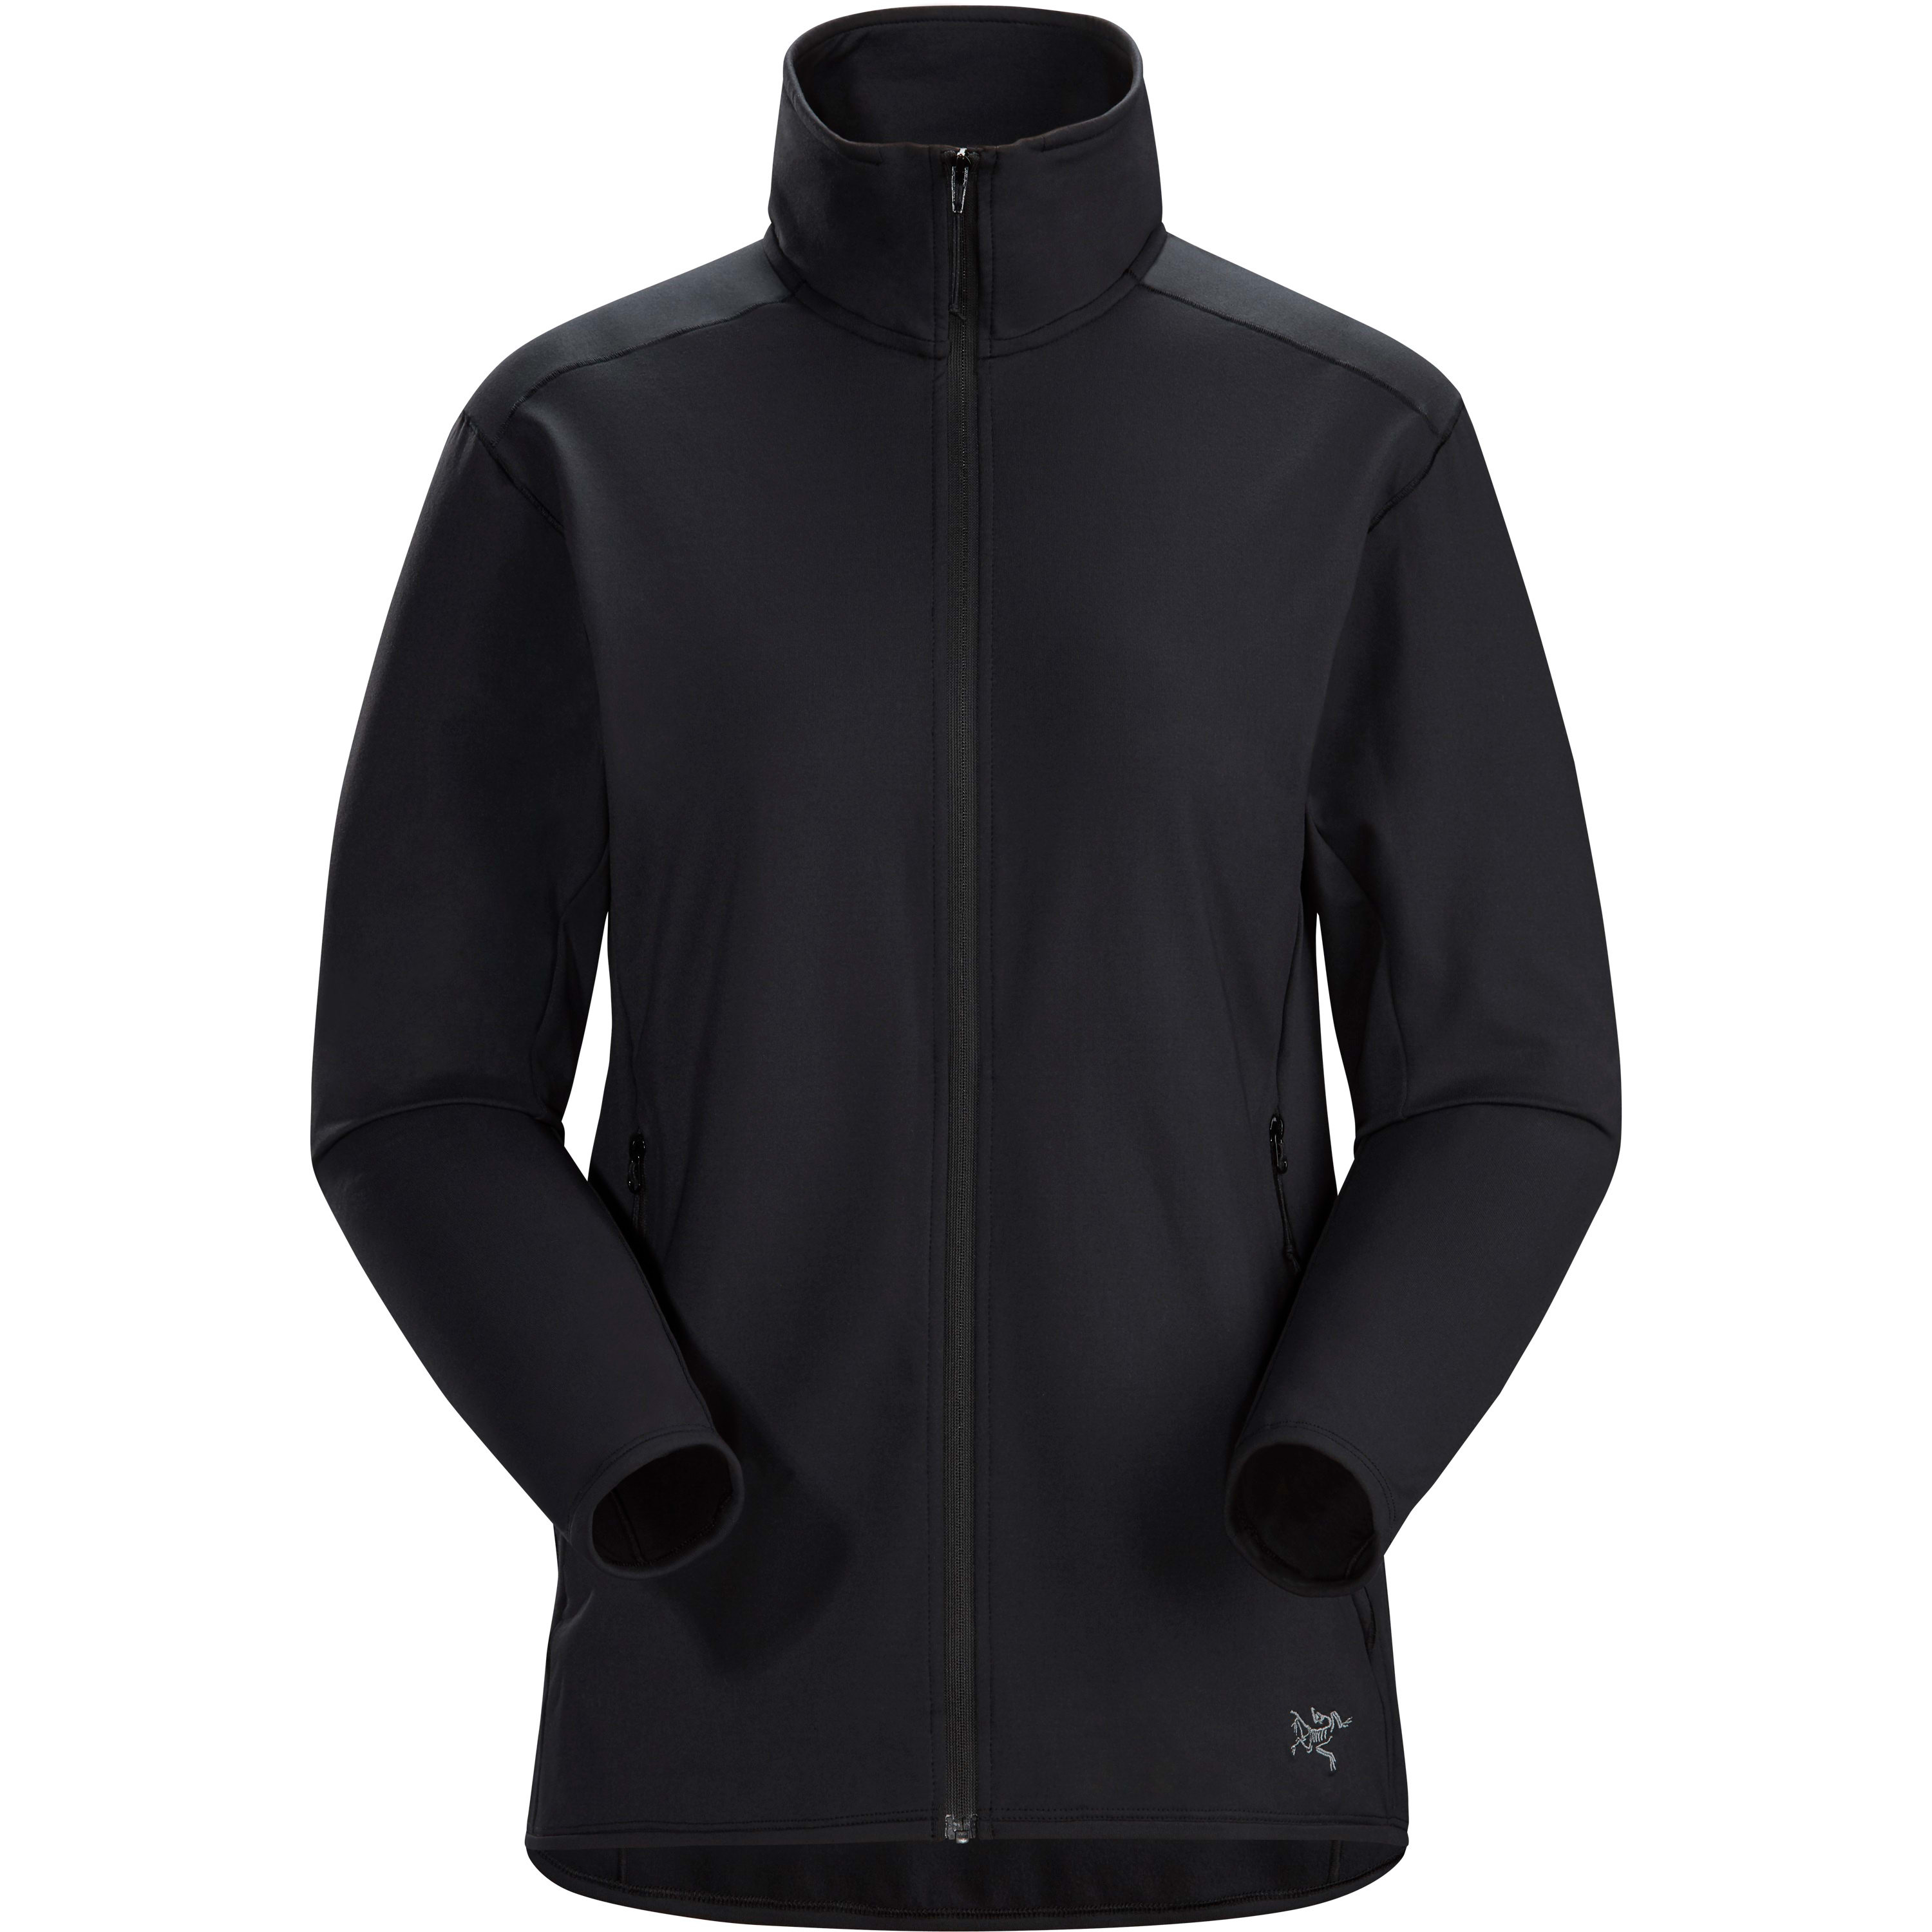 Buy Arc'teryx Kyanite Light Jacket Women's from Outnorth